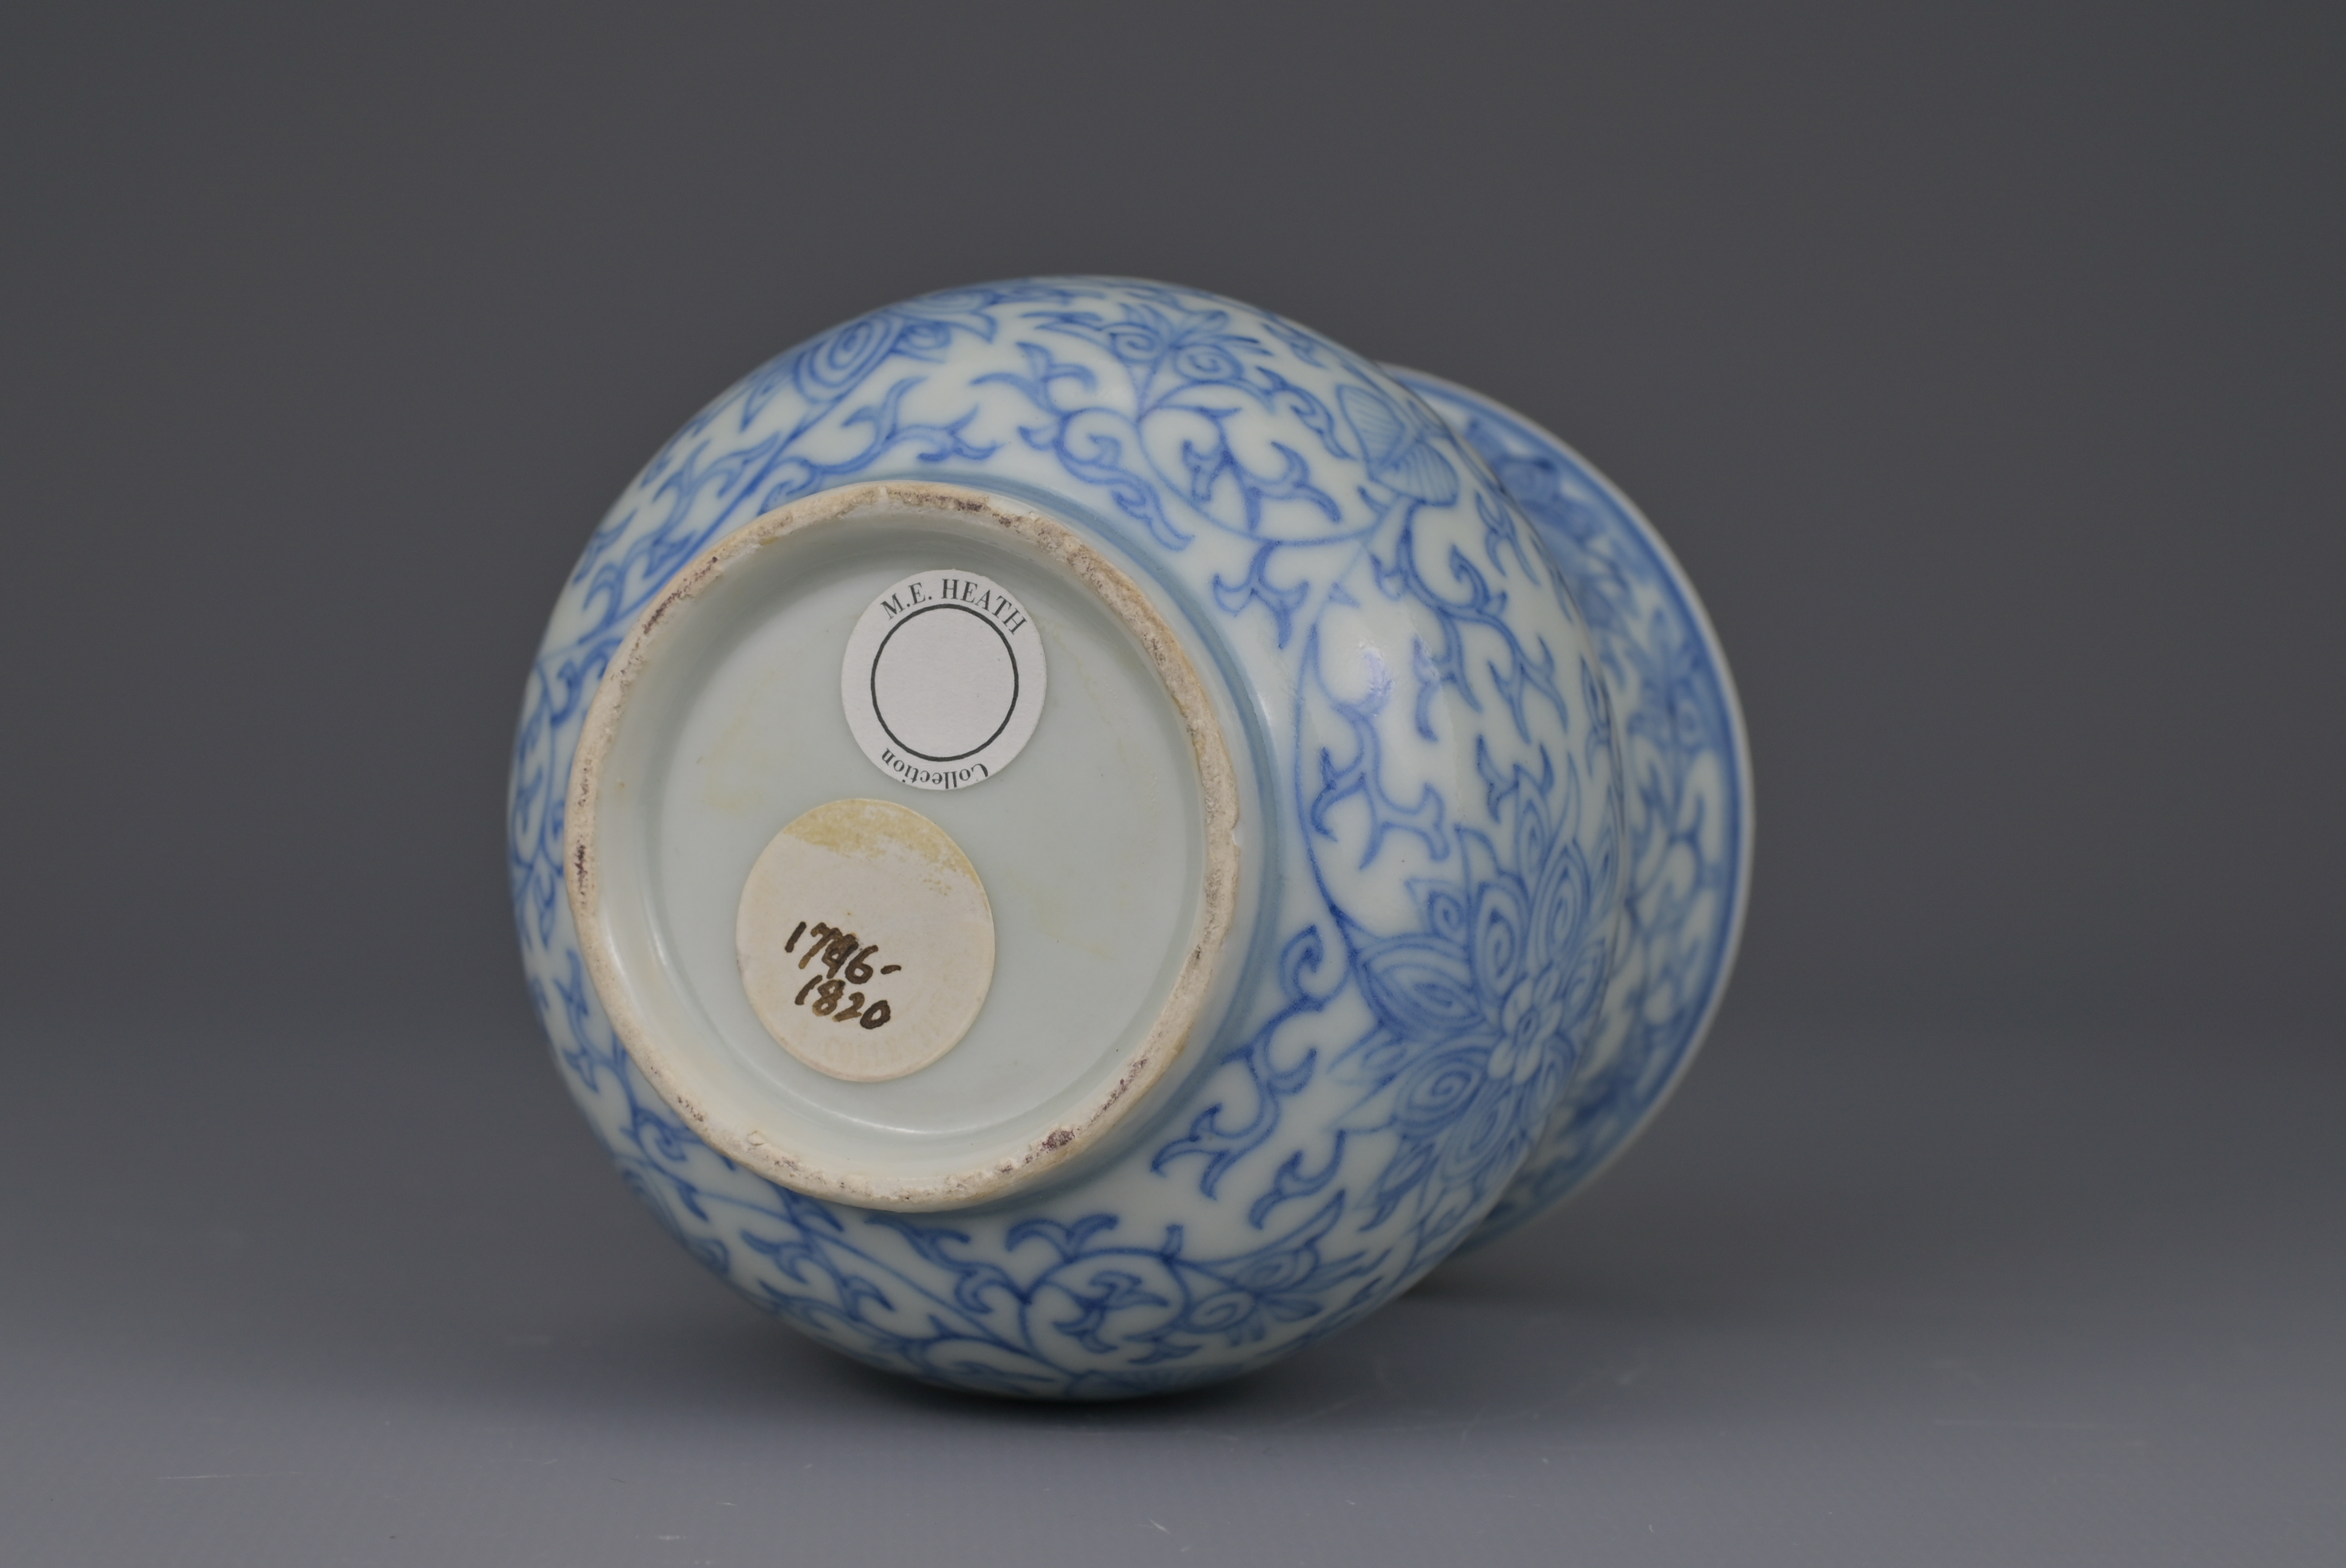 CHINESE BLUE AND WHITE PORCELAIN SPITTOON ‘ZHADOU’, JIAQING PERIOD, EARLY 19th CENTURY - Image 5 of 8